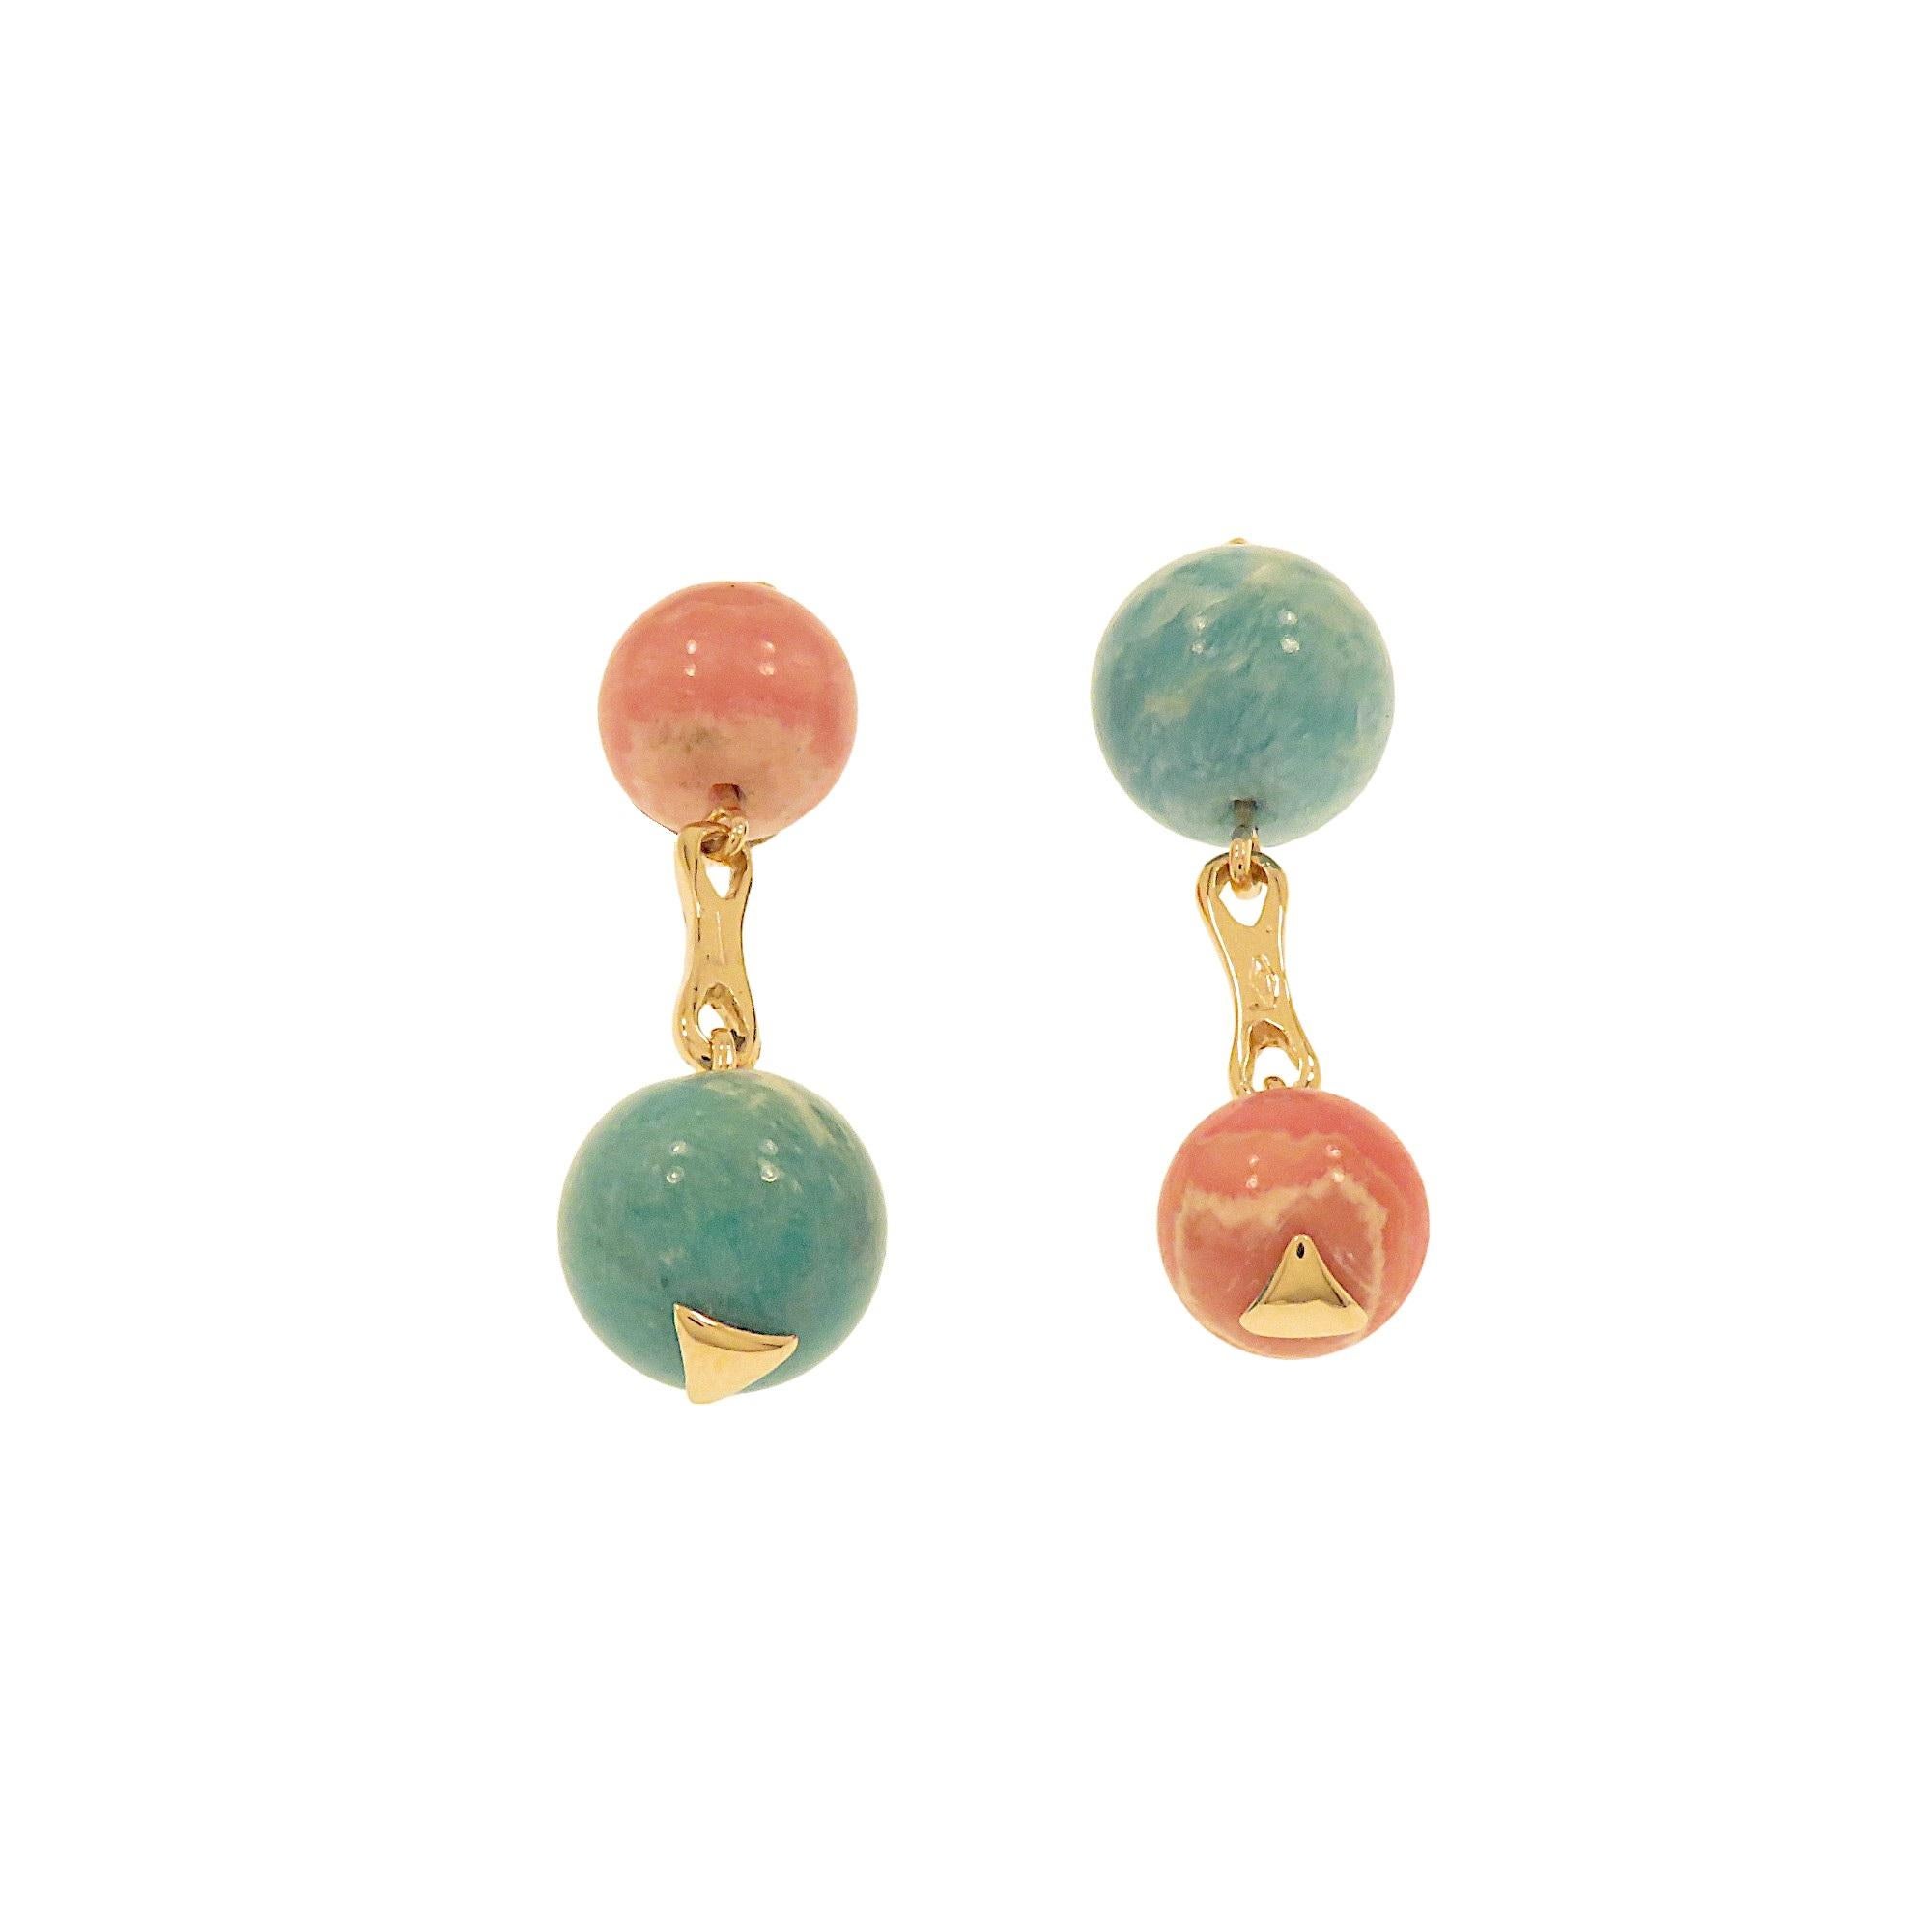 Elegant minimalist cufflinks handcrafted in 9k rose gold with rhodochrosite and amazonite. The combination of colors and choice of stones make these jewels whimsical and unique. They were made in our goldsmith's workshop in Milan by expert hands and